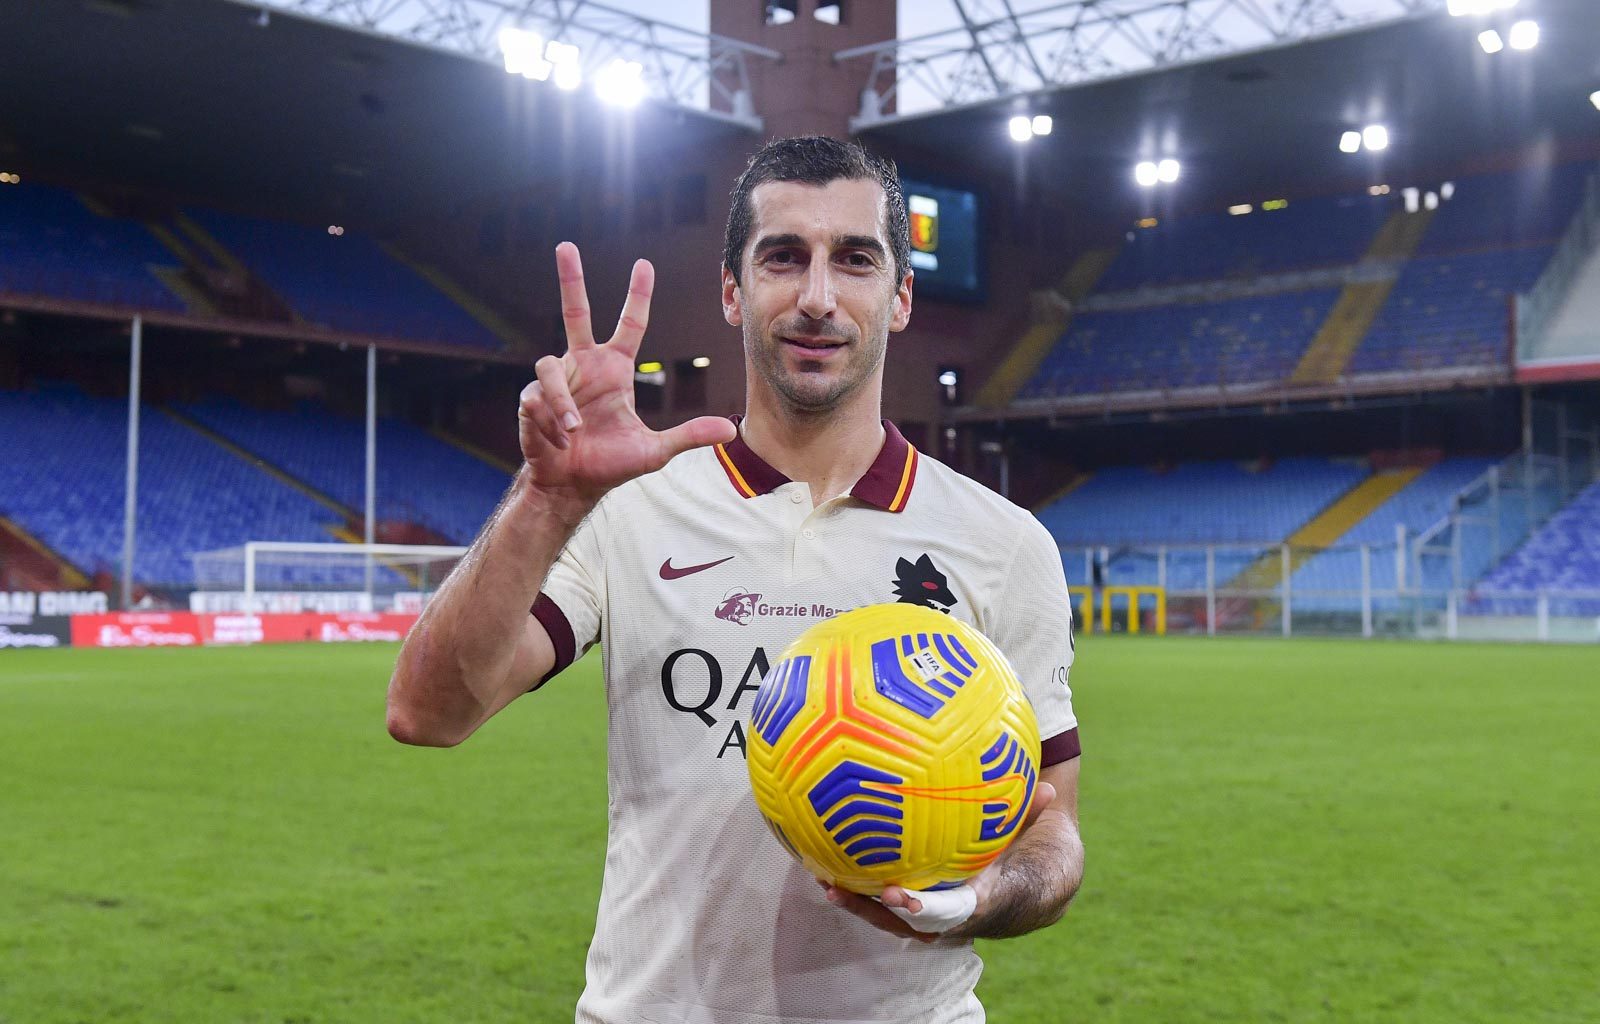 Henrikh Mkhitaryan stole the show with a hat-trick tonight, scoring all the goals as Roma won 3-1 at Genoa in the Serie A Round 7